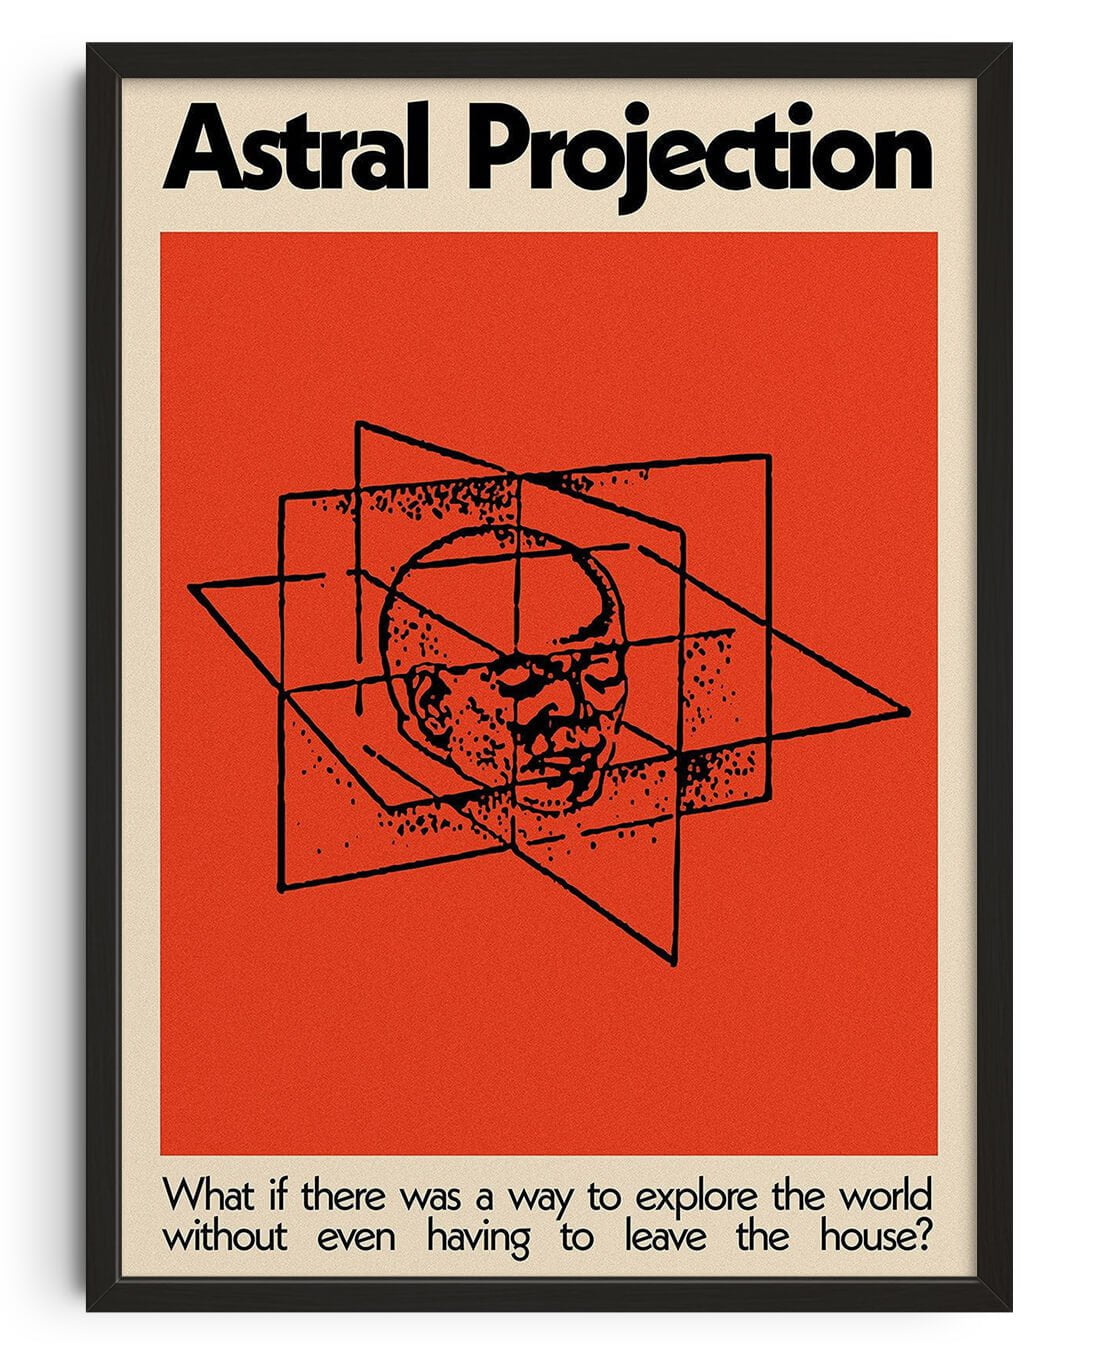 Astral Projection by George Kempster contemporary wall art print from DROOL